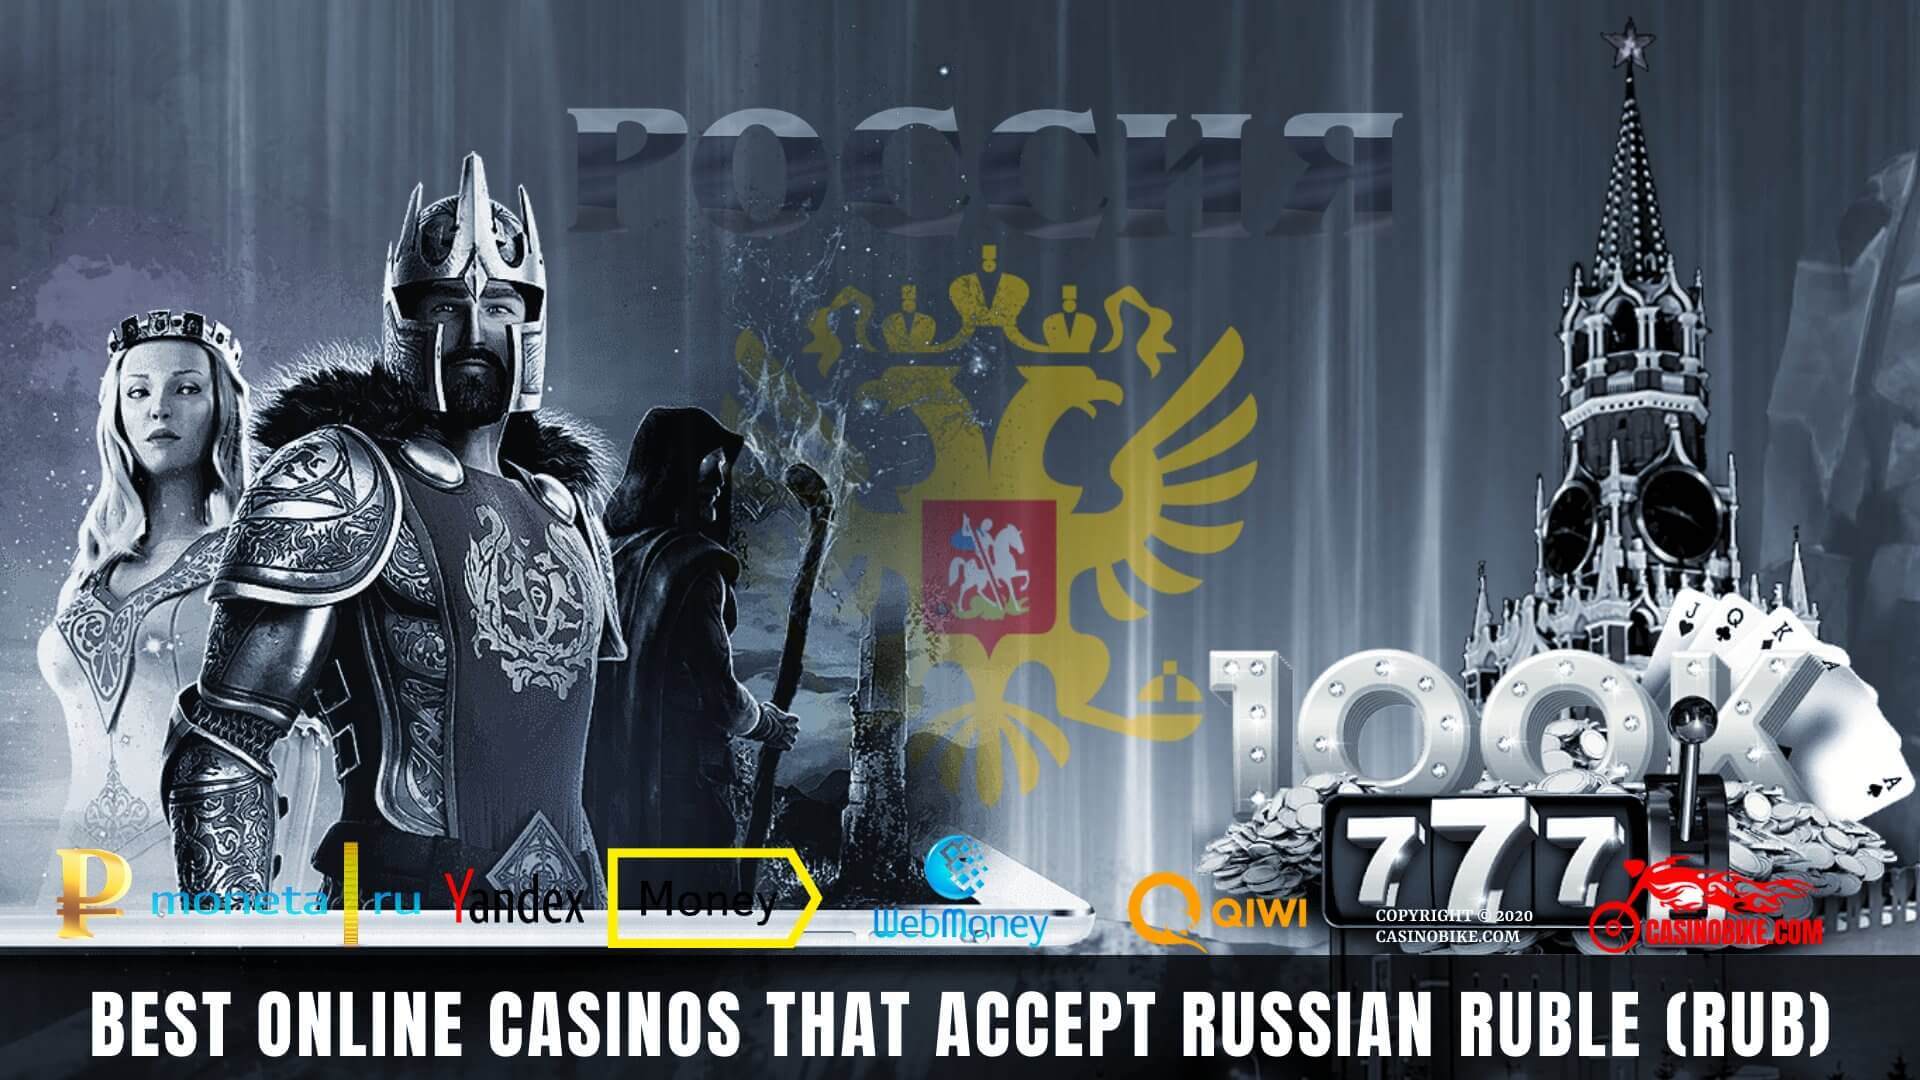 Best online casinos that accept Russian Ruble